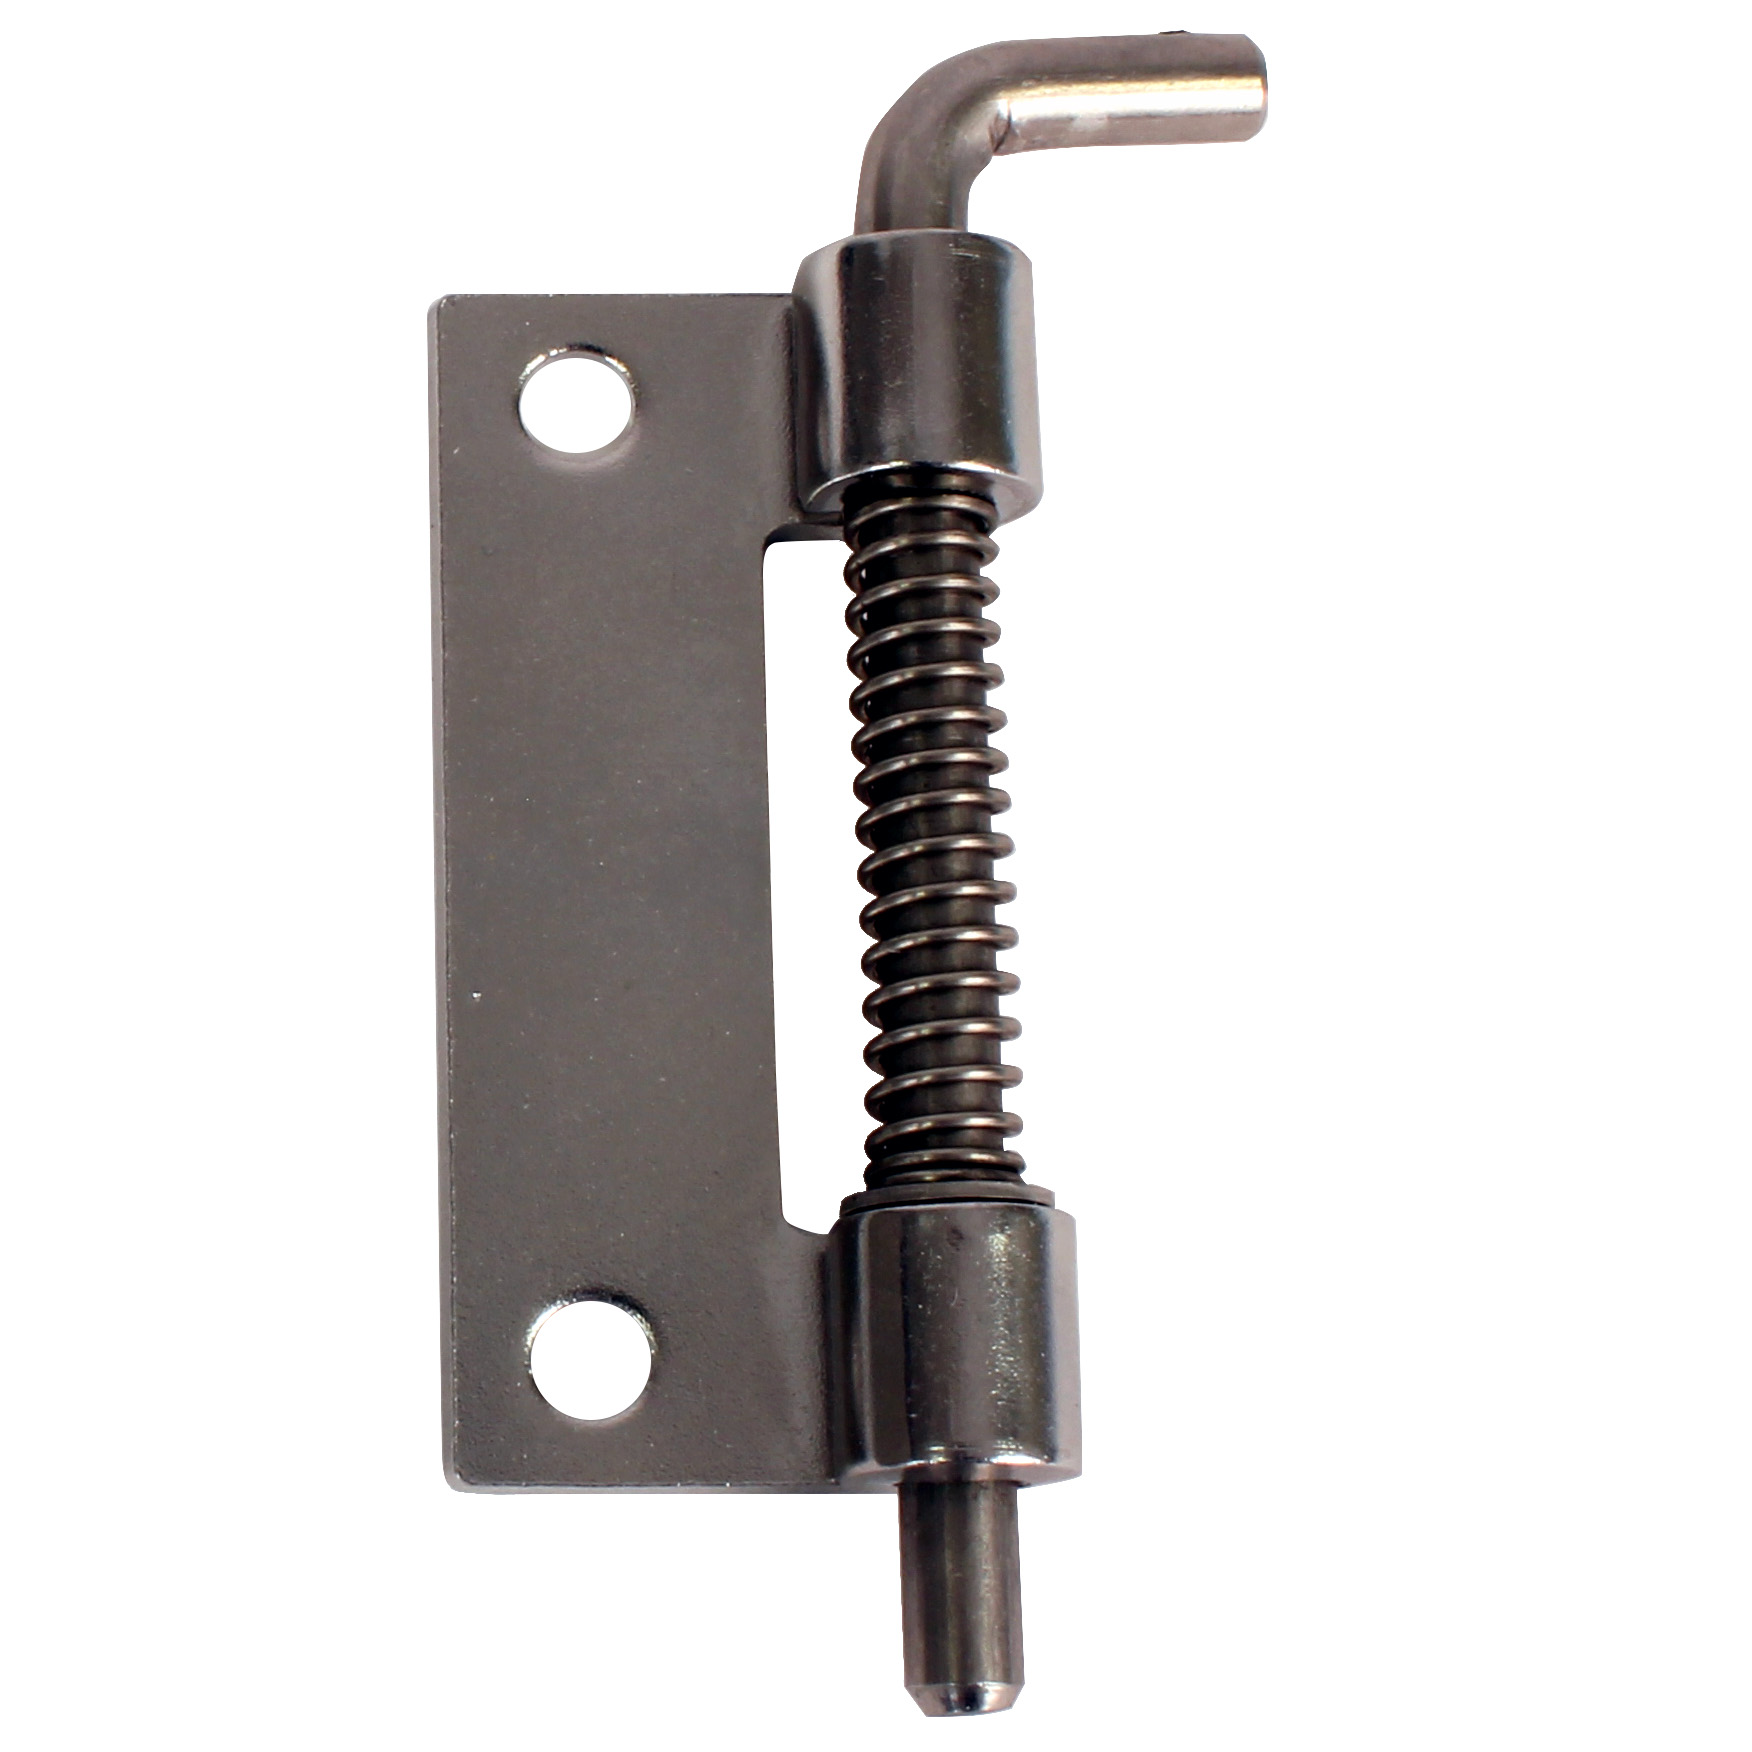 Spring loaded latch - Spring return latch - stainless steel -  - 